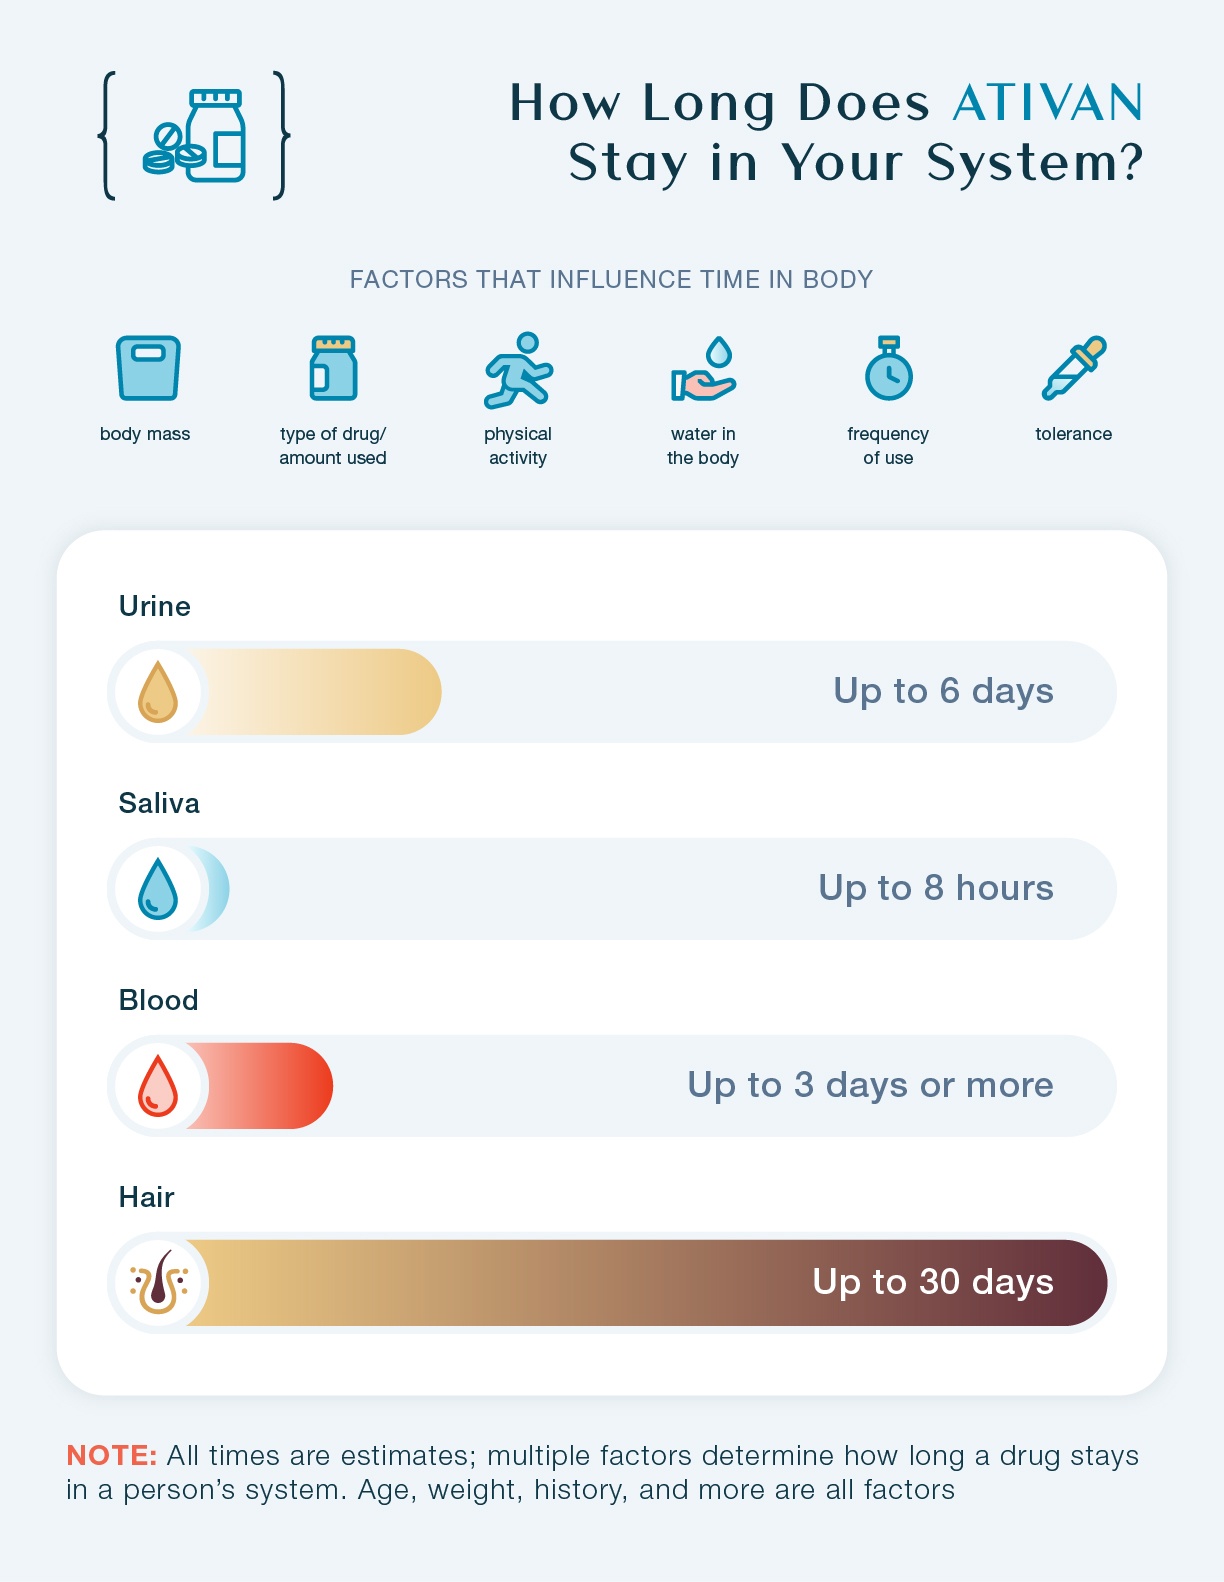 How long does Ativan stay in your system? This chart shows how long Ativan stays in urine, saliva, blood, and hair